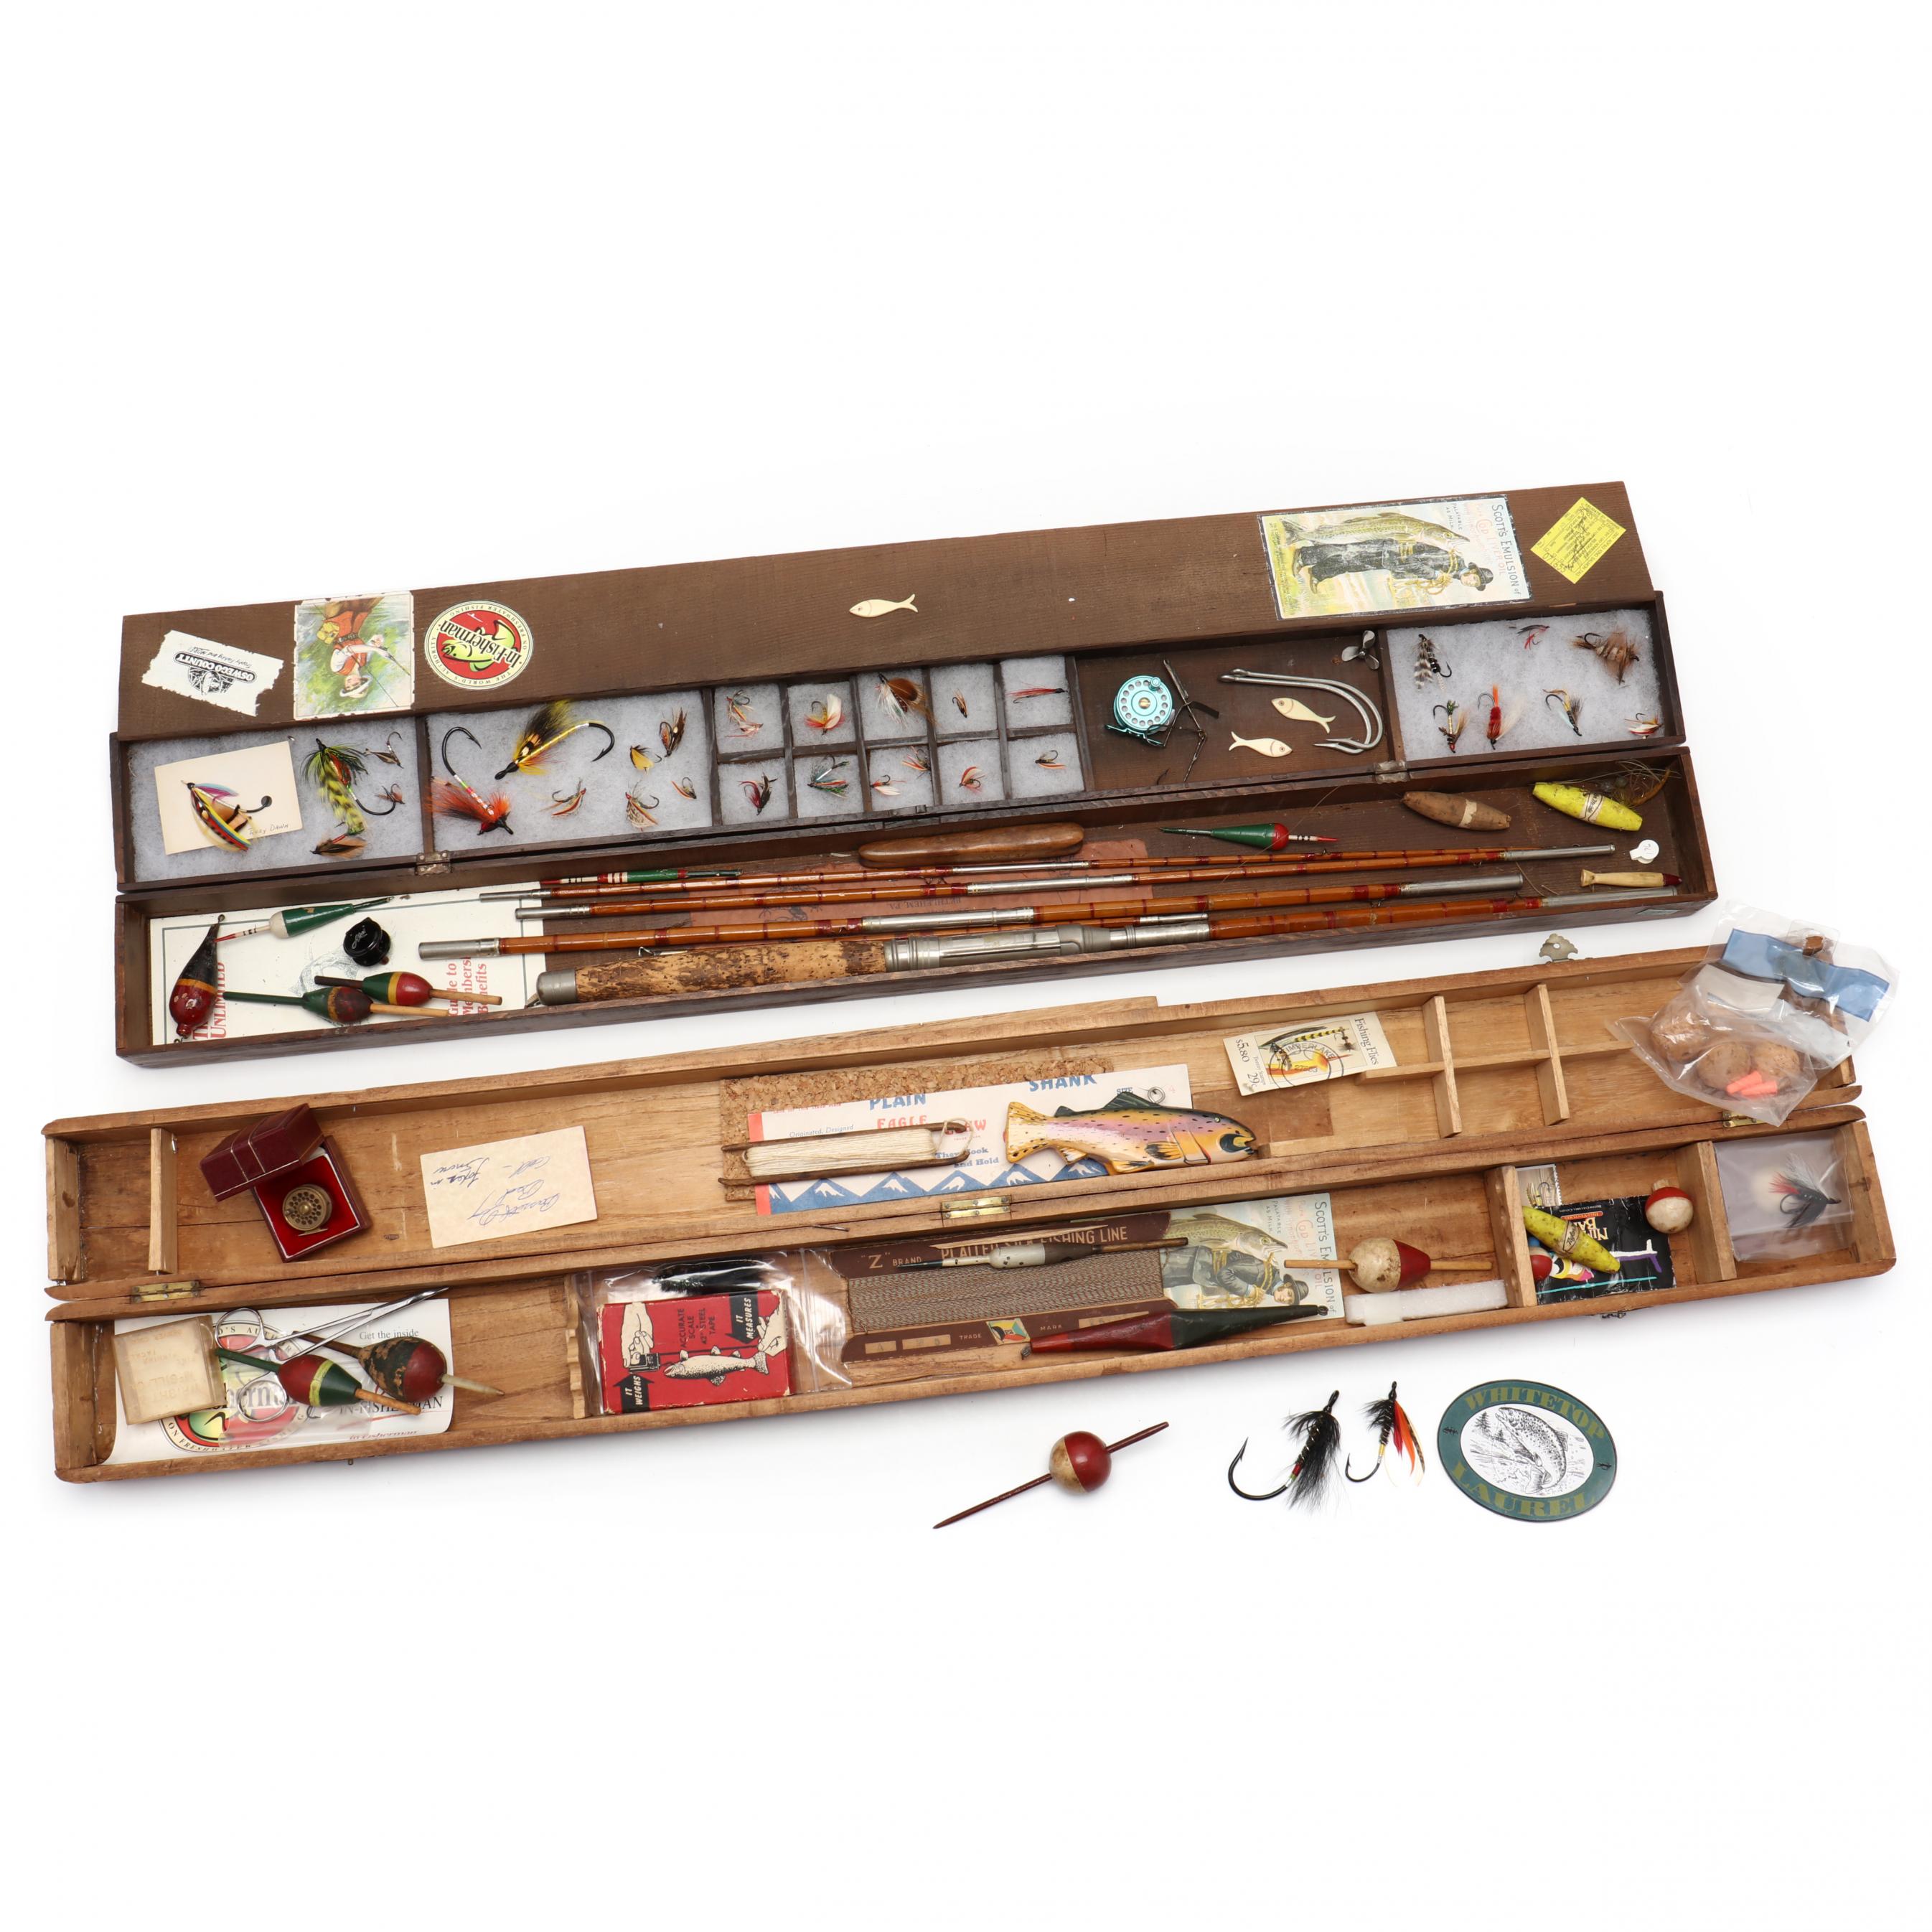 Lot 50 - Vintage Fly-Fishing Rods, with Set in Wooden Case, Langley Wooden  Rod & More - Sac Valley Auctions